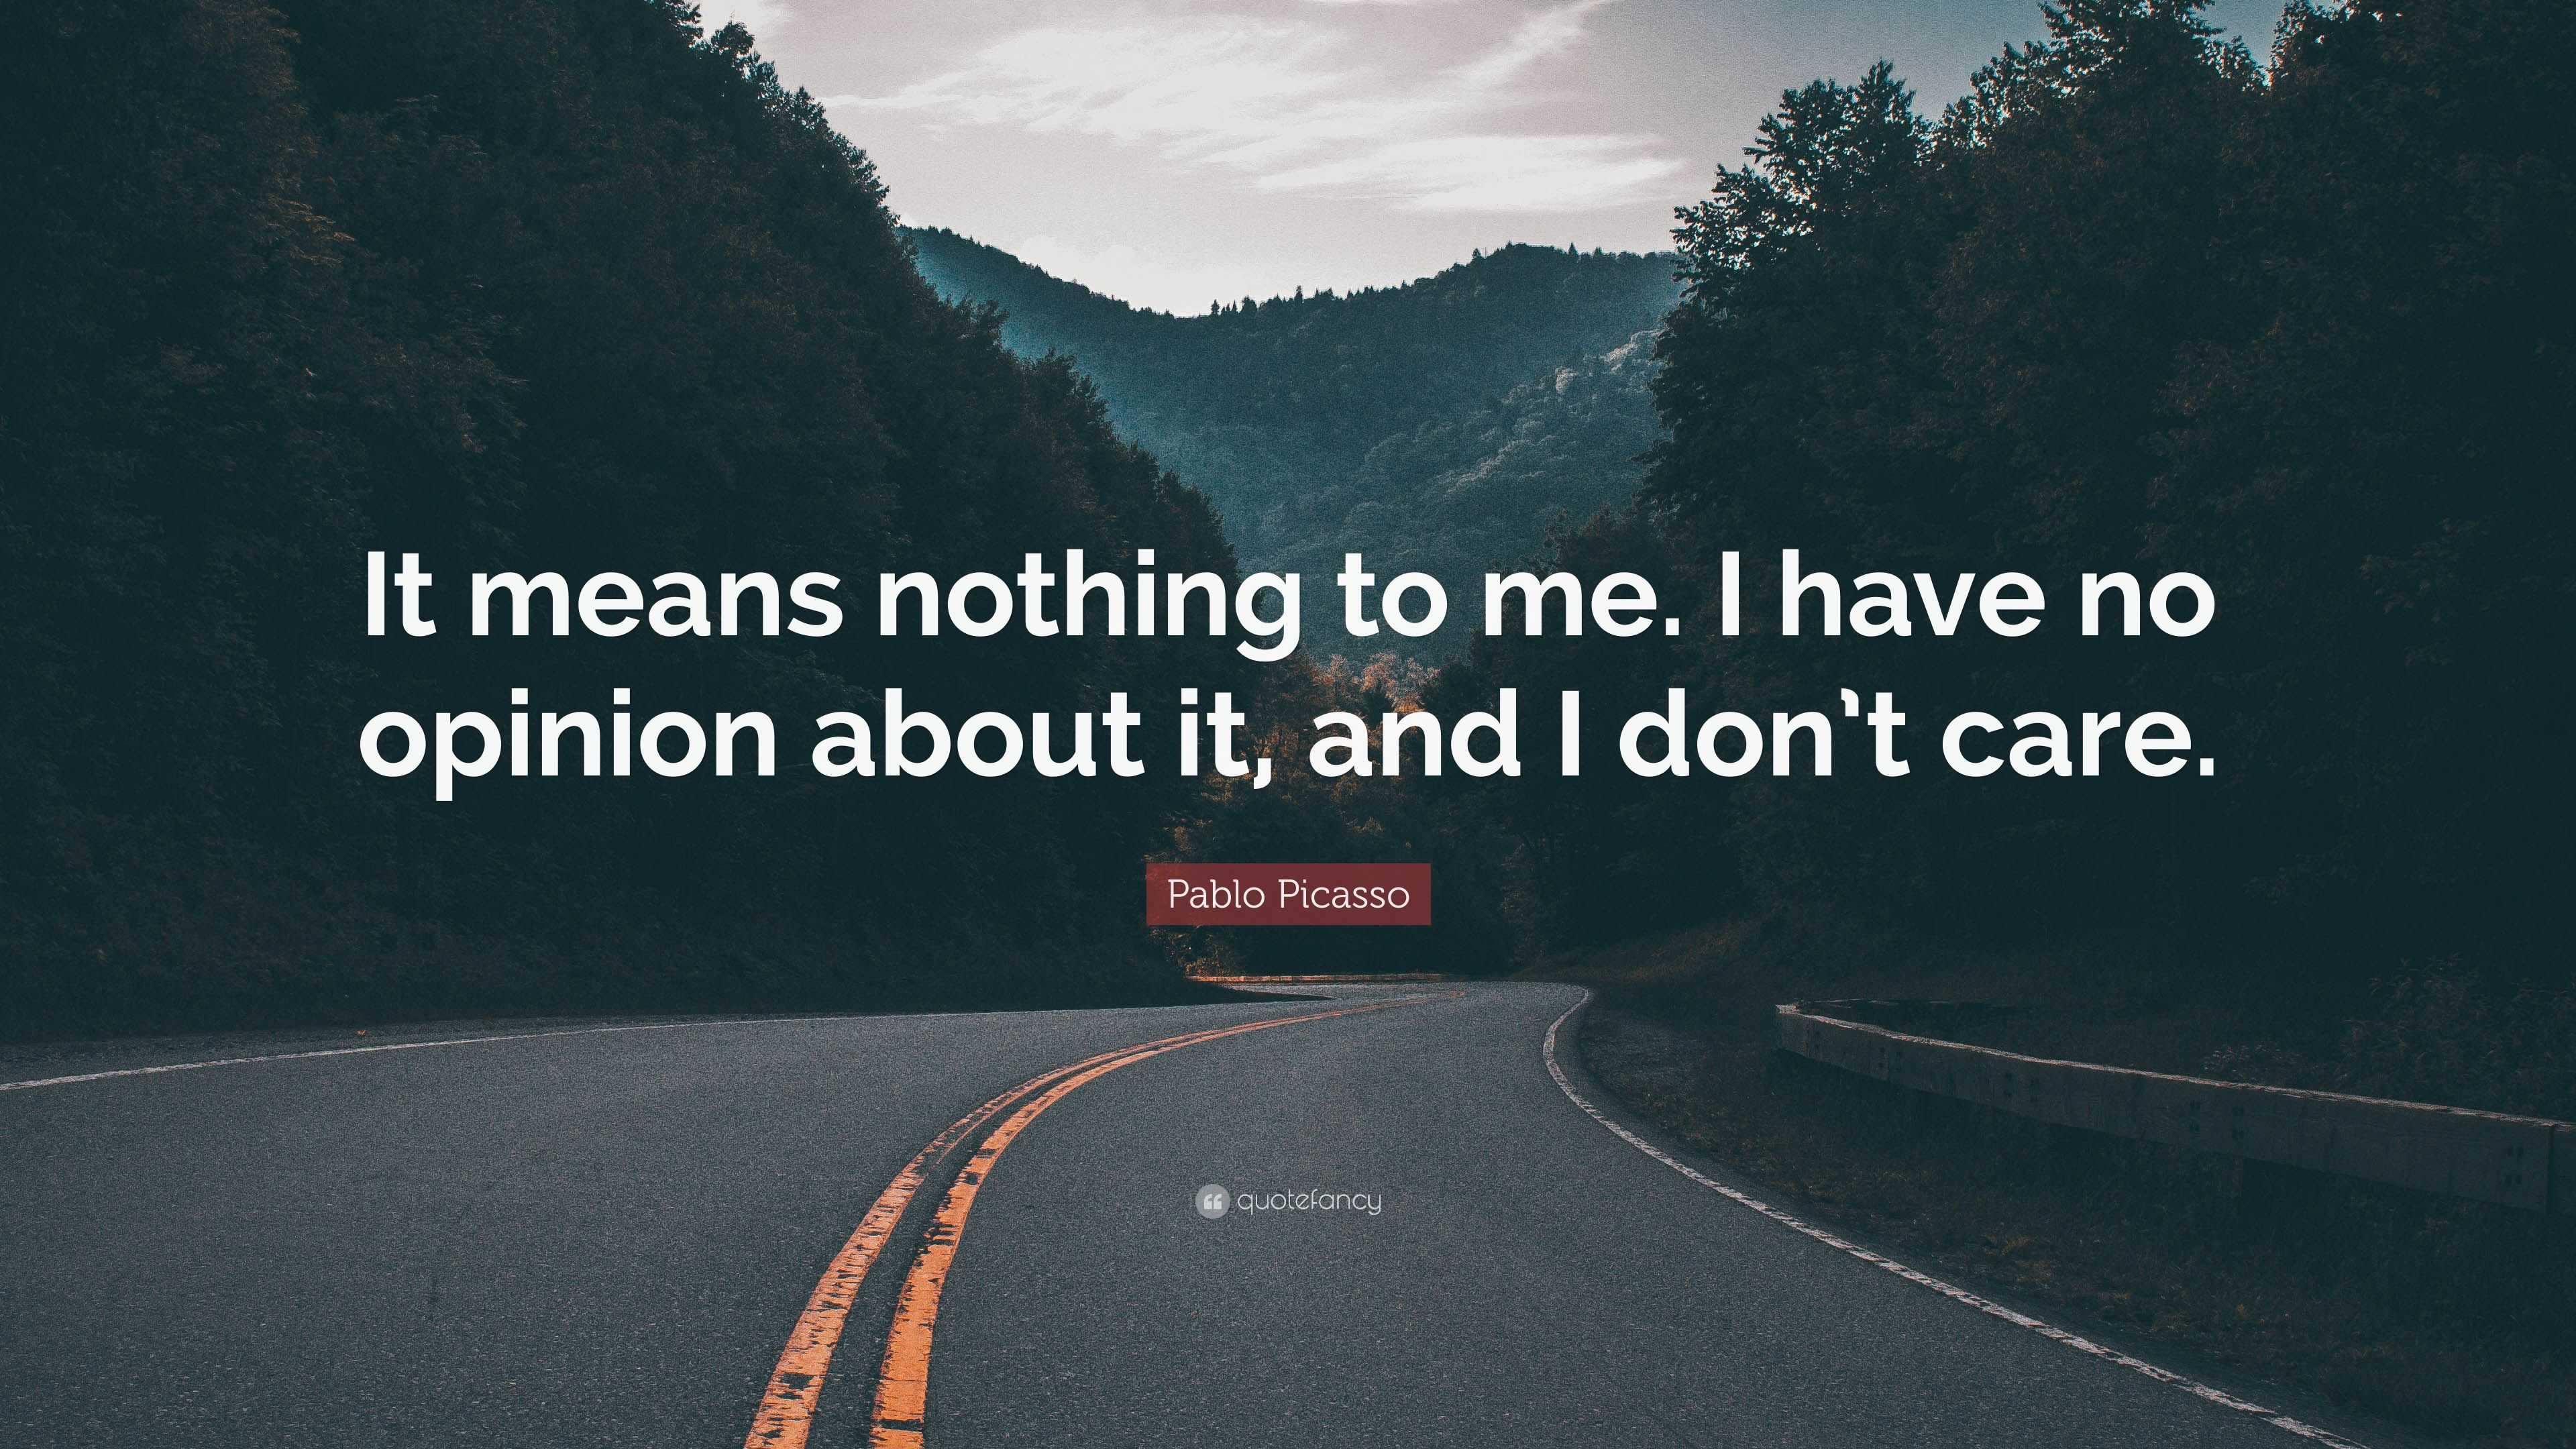 Pablo Picasso Quote: “It means nothing to me. I have no opinion about it,  and I